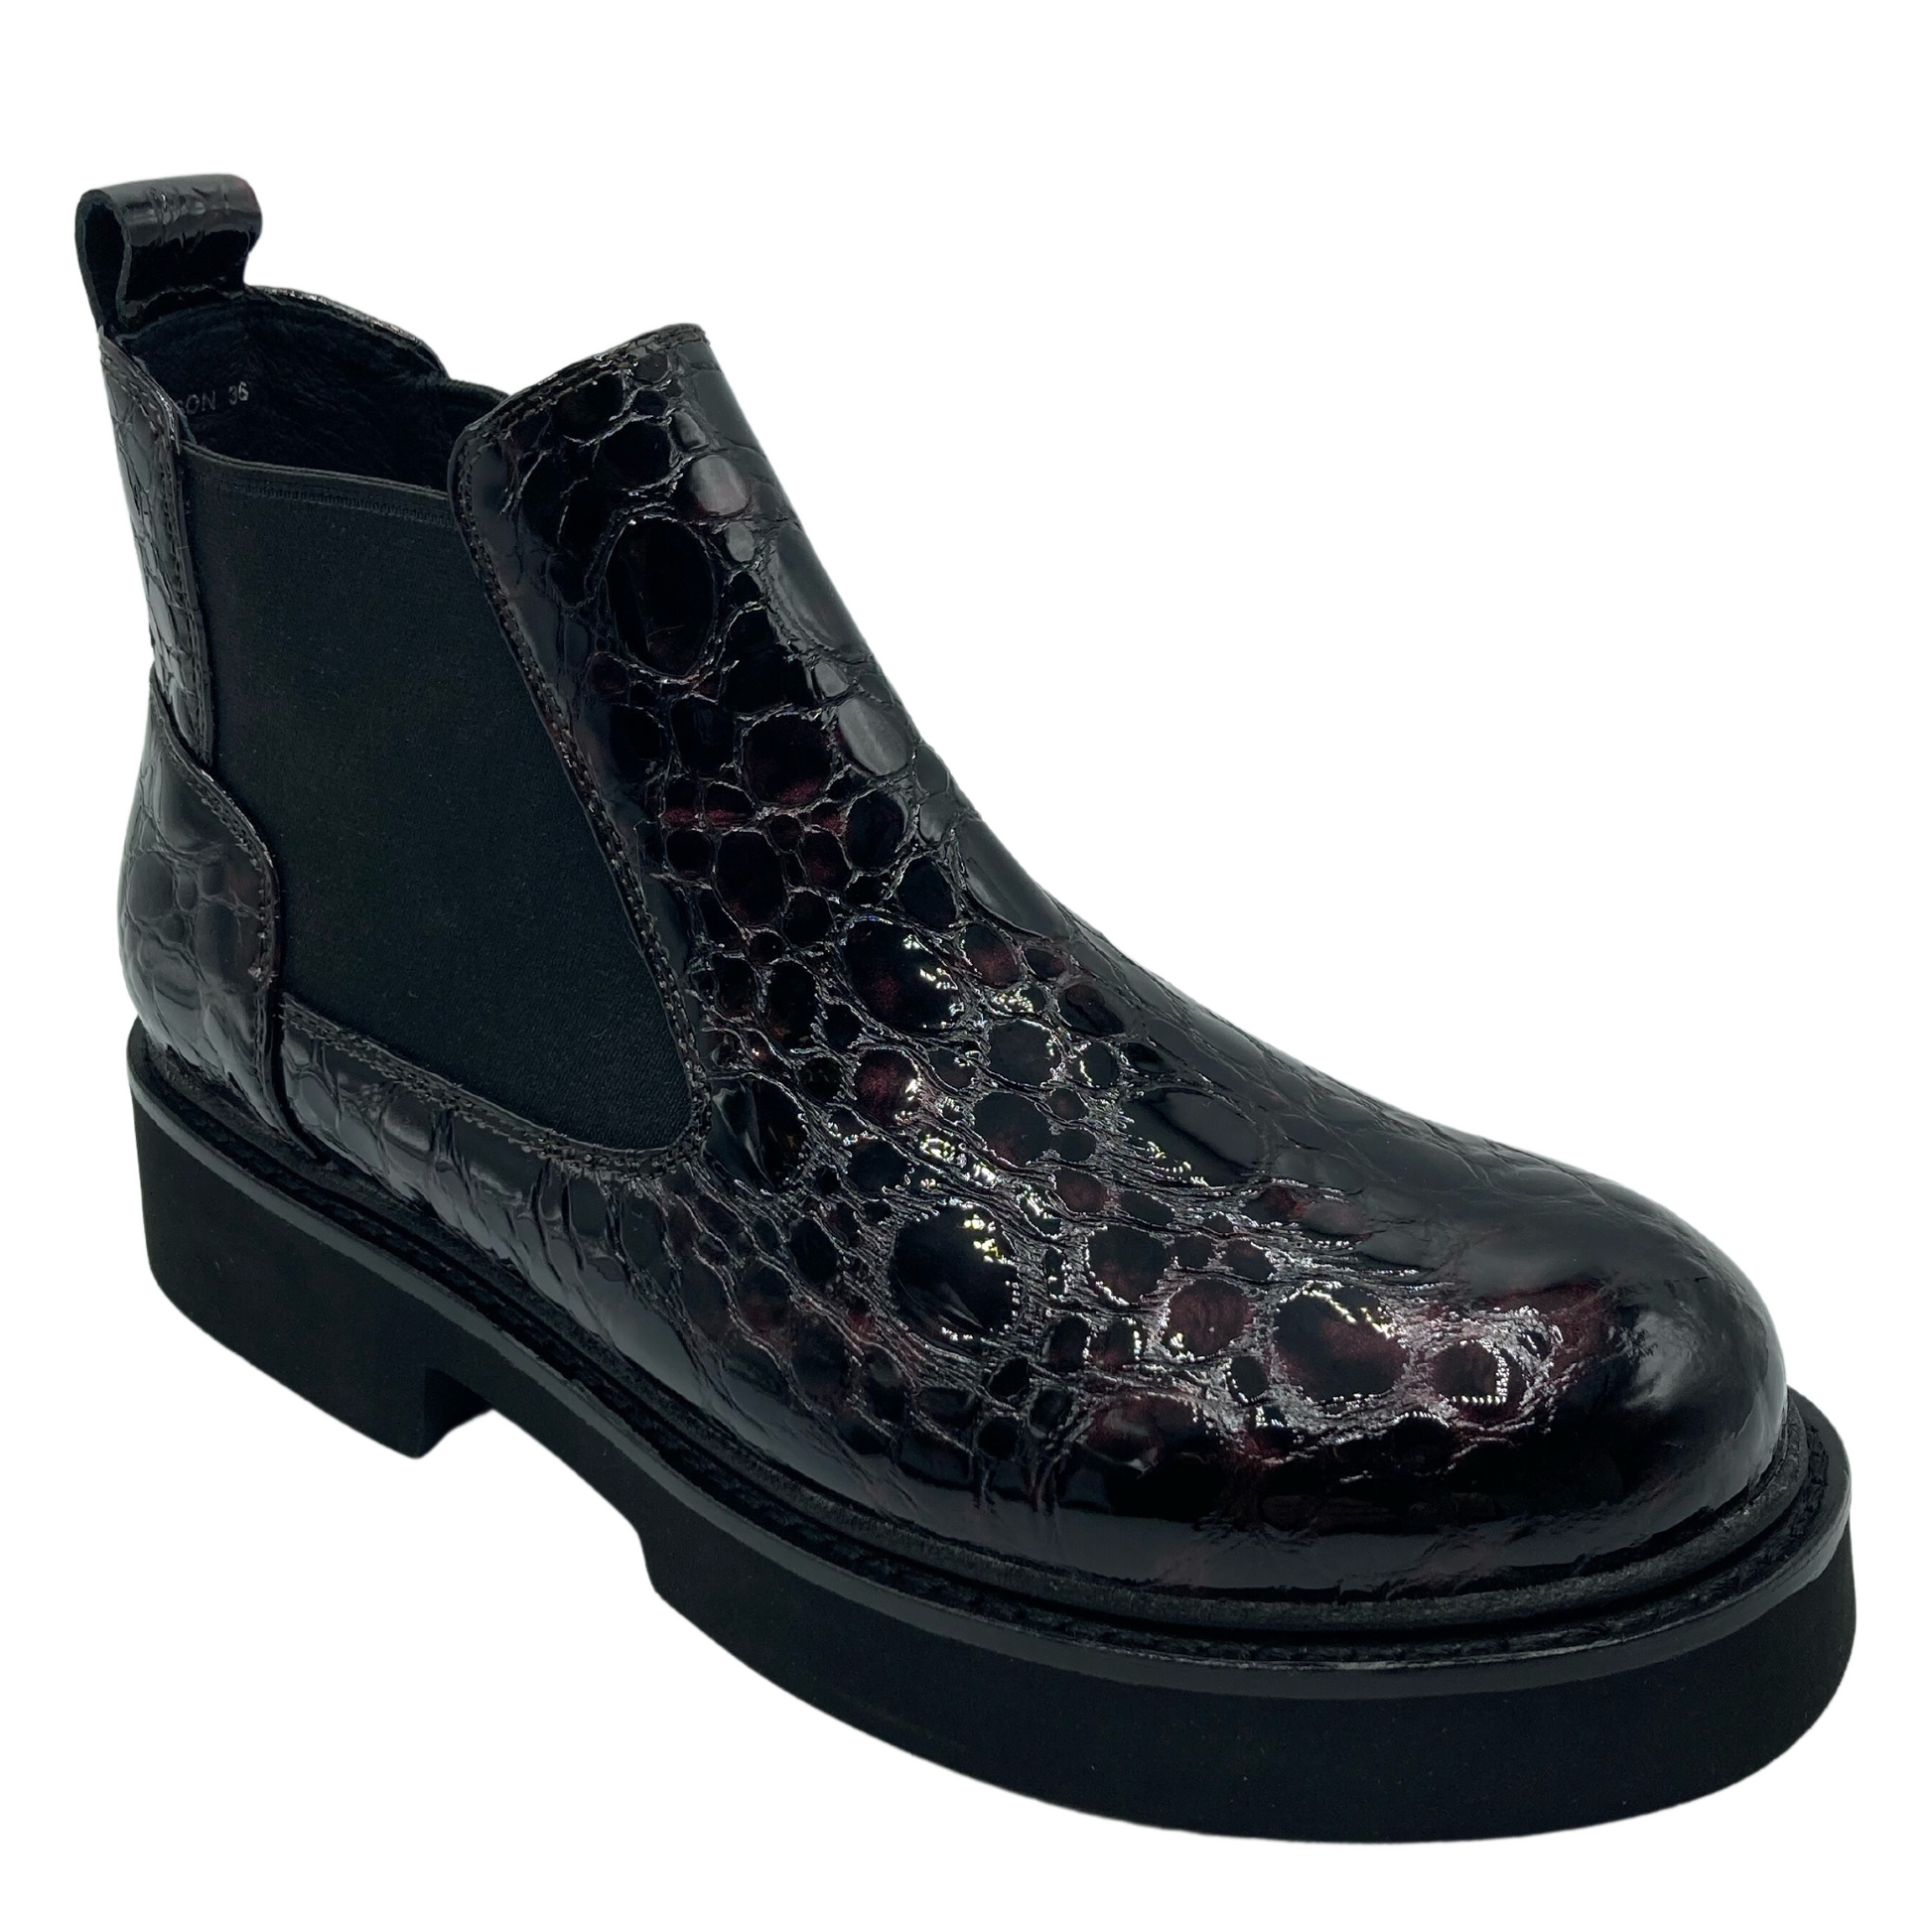 45 degree angled view of textured leather ankle boot with elastic gore and black rubber outsole